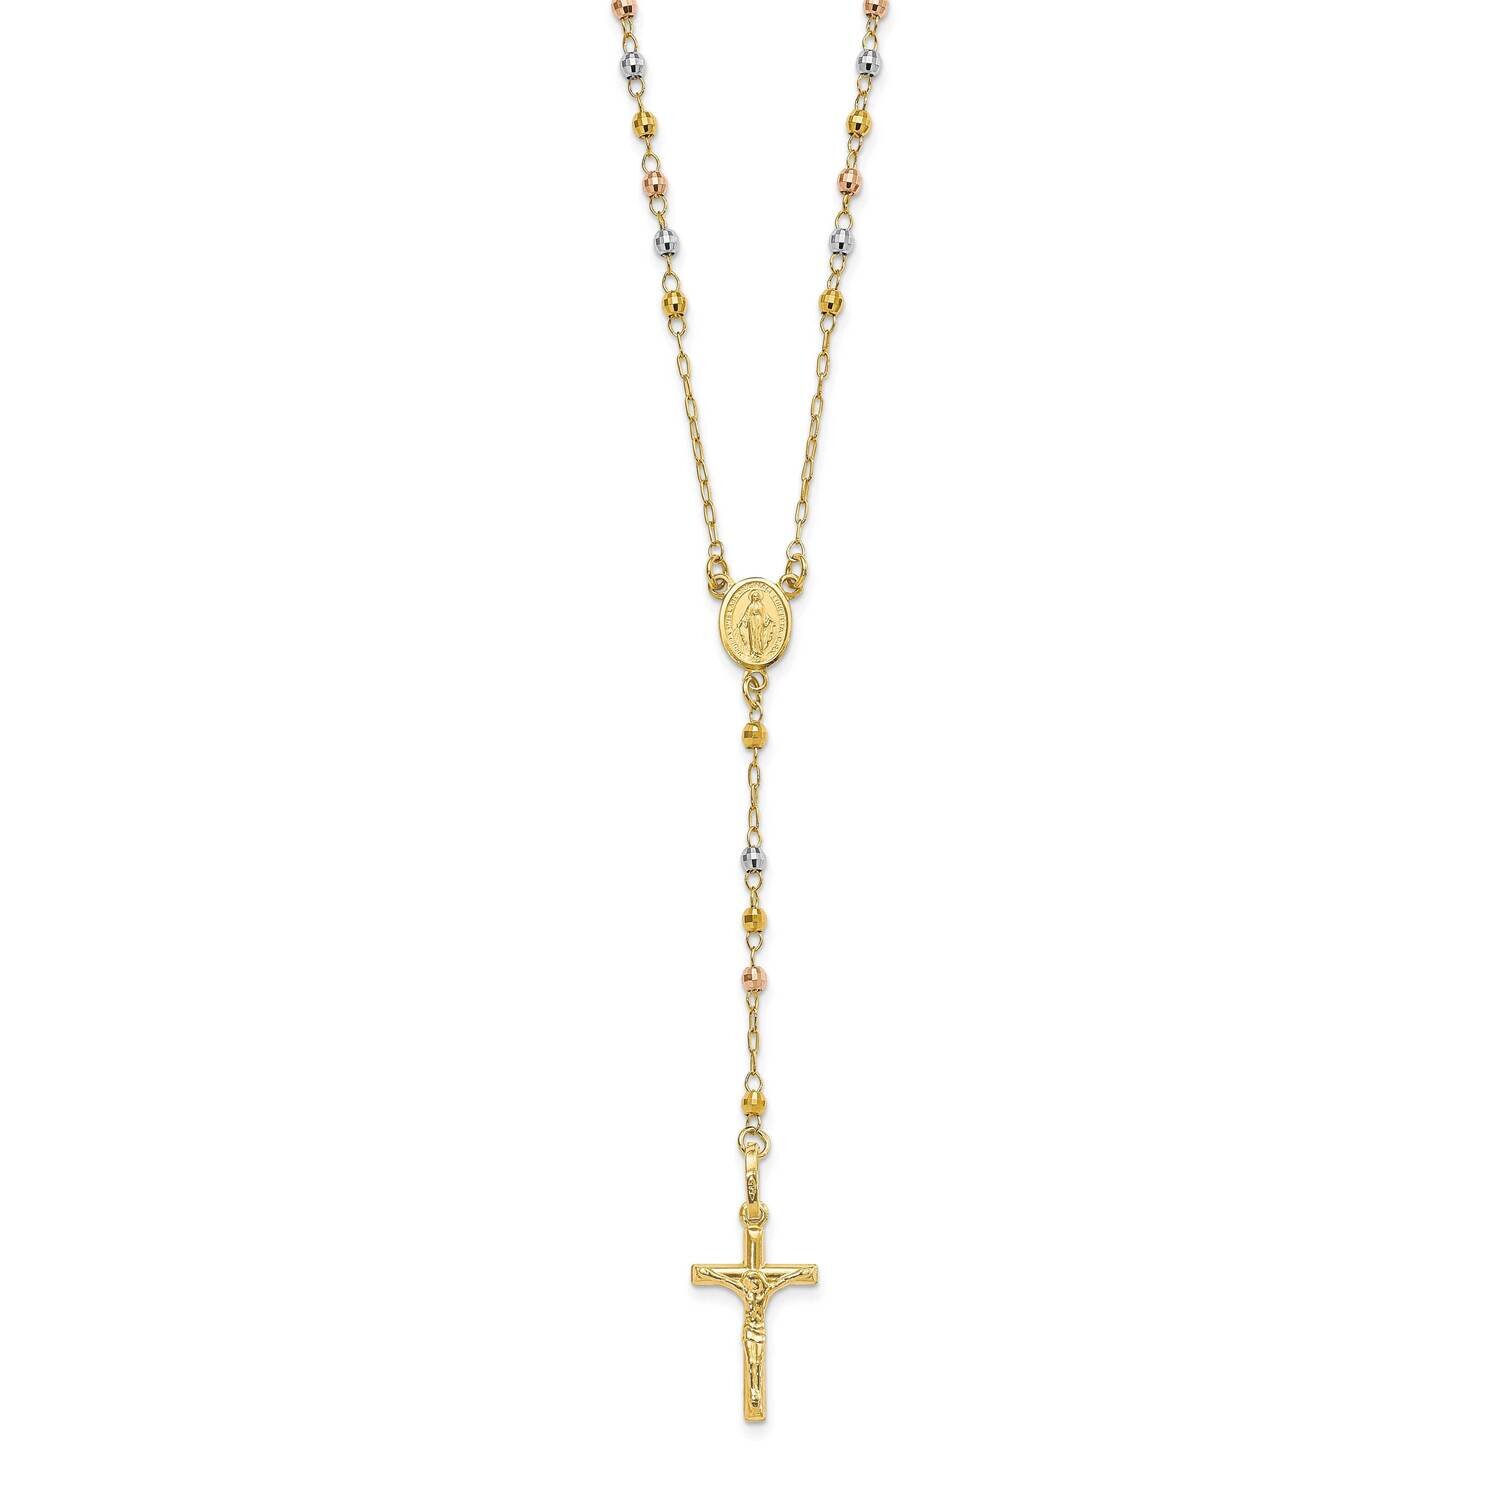 Polished Faceted Beads Rosary Necklace 24 Inch 14k Tri-Color Gold SF2964-24